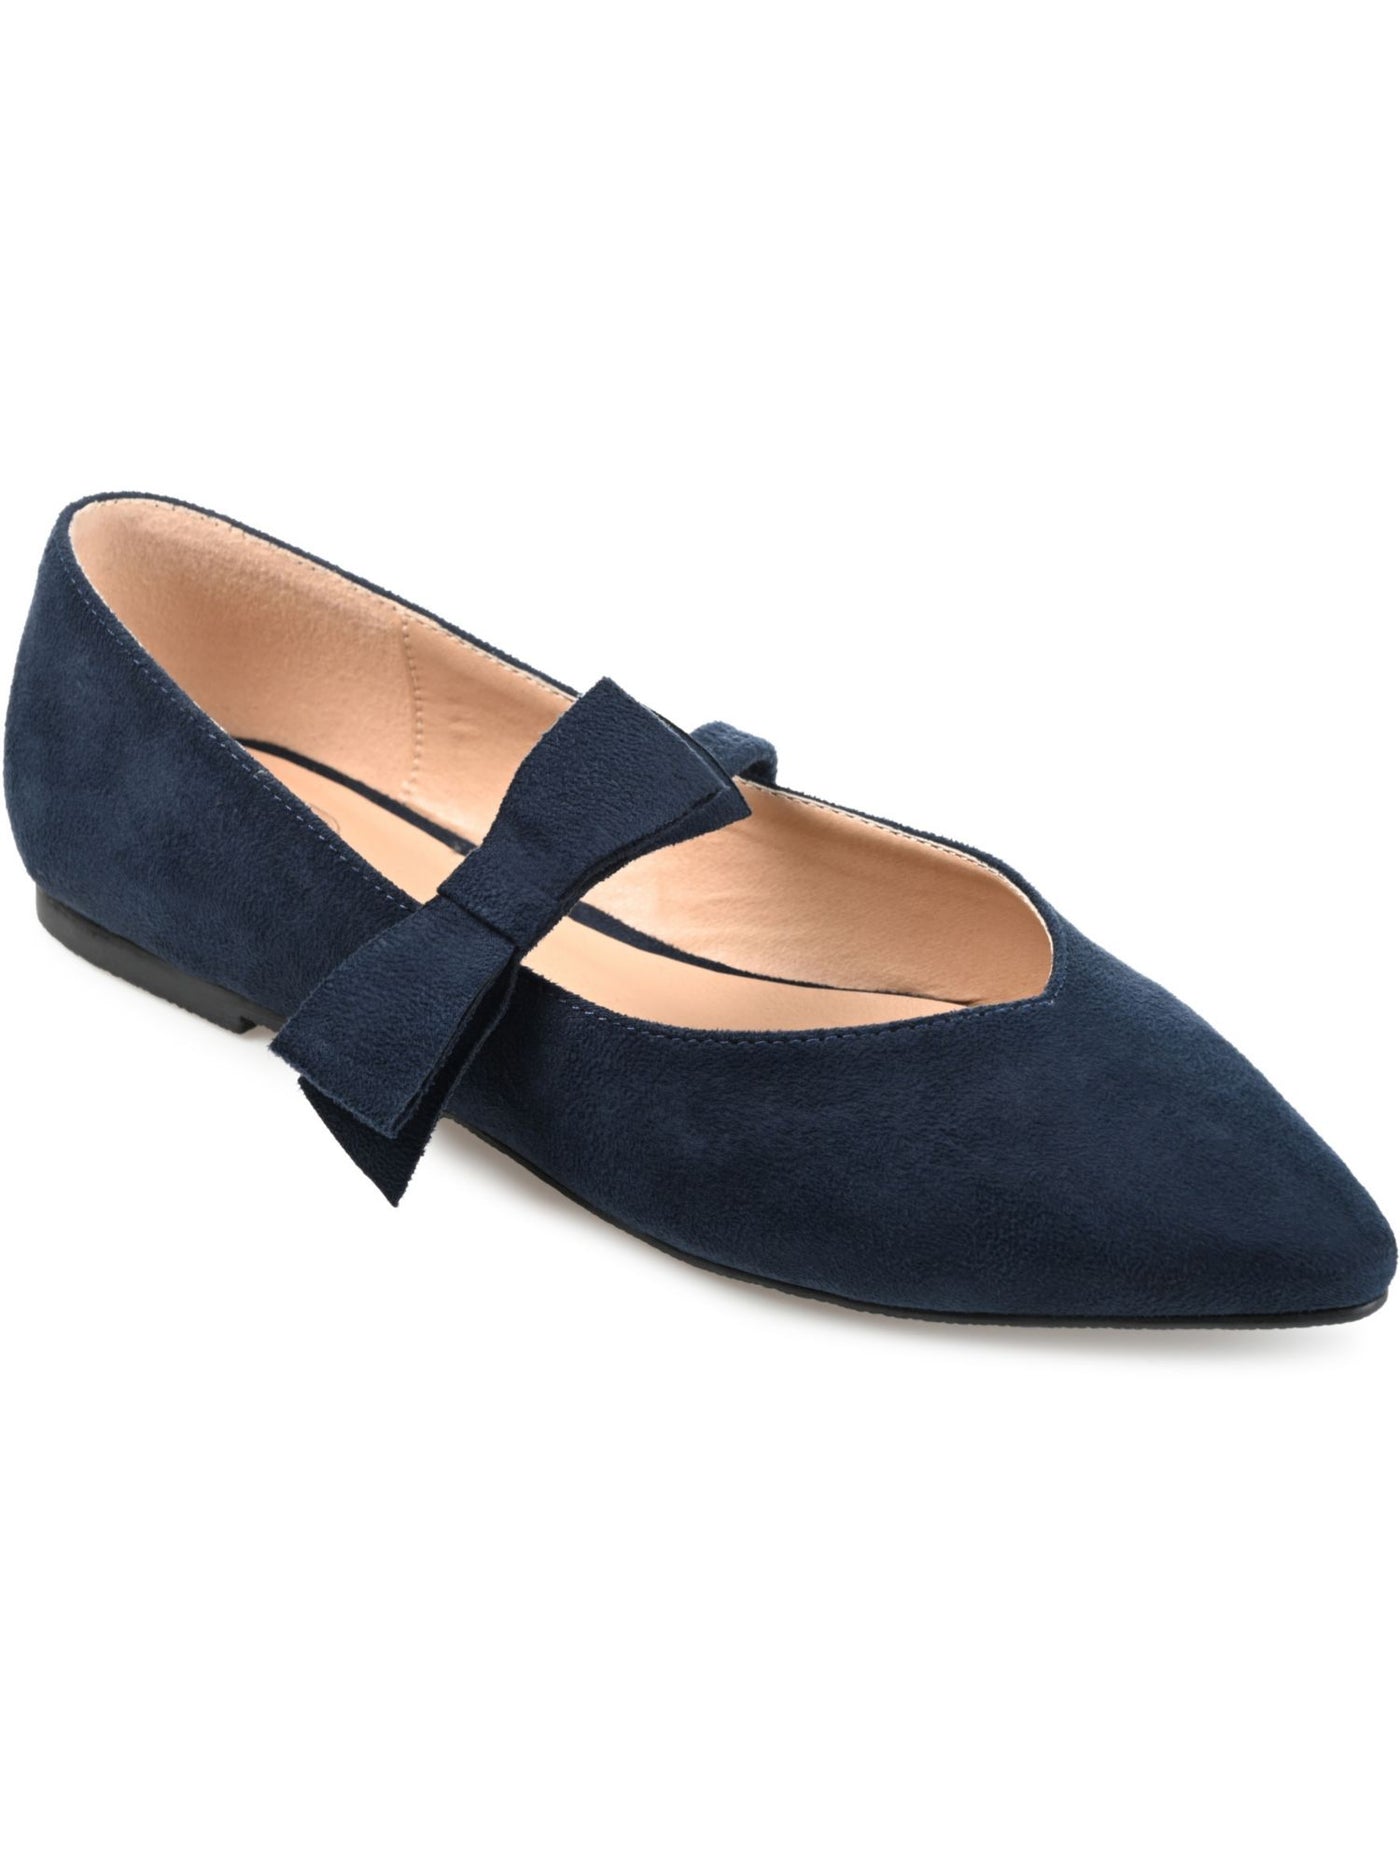 JOURNEE COLLECTION Womens Navy Bow Strap Mary Jane Goring Padded Aizlynn Pointed Toe Slip On Flats Shoes 7.5 M